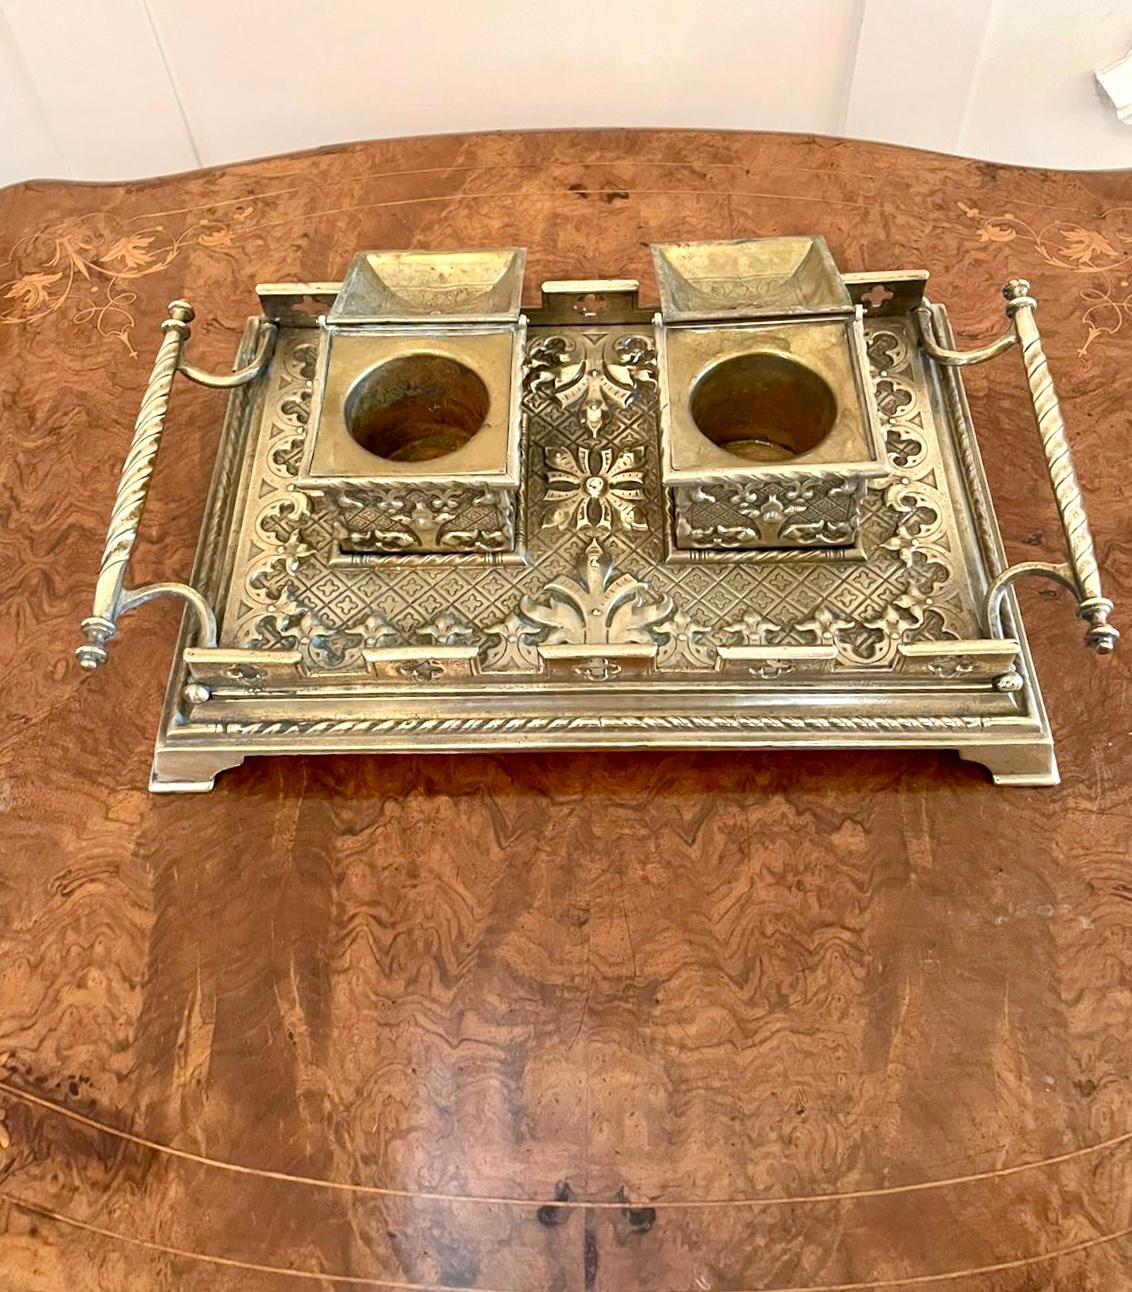 Outstanding antique Victorian brass desk set having two brass inkwells with lift up lids. It boasts a magnificent gothic ornate brass decoration and has two shaped carrying handles standing on shaped bracket feet.

A beautiful decorative piece in